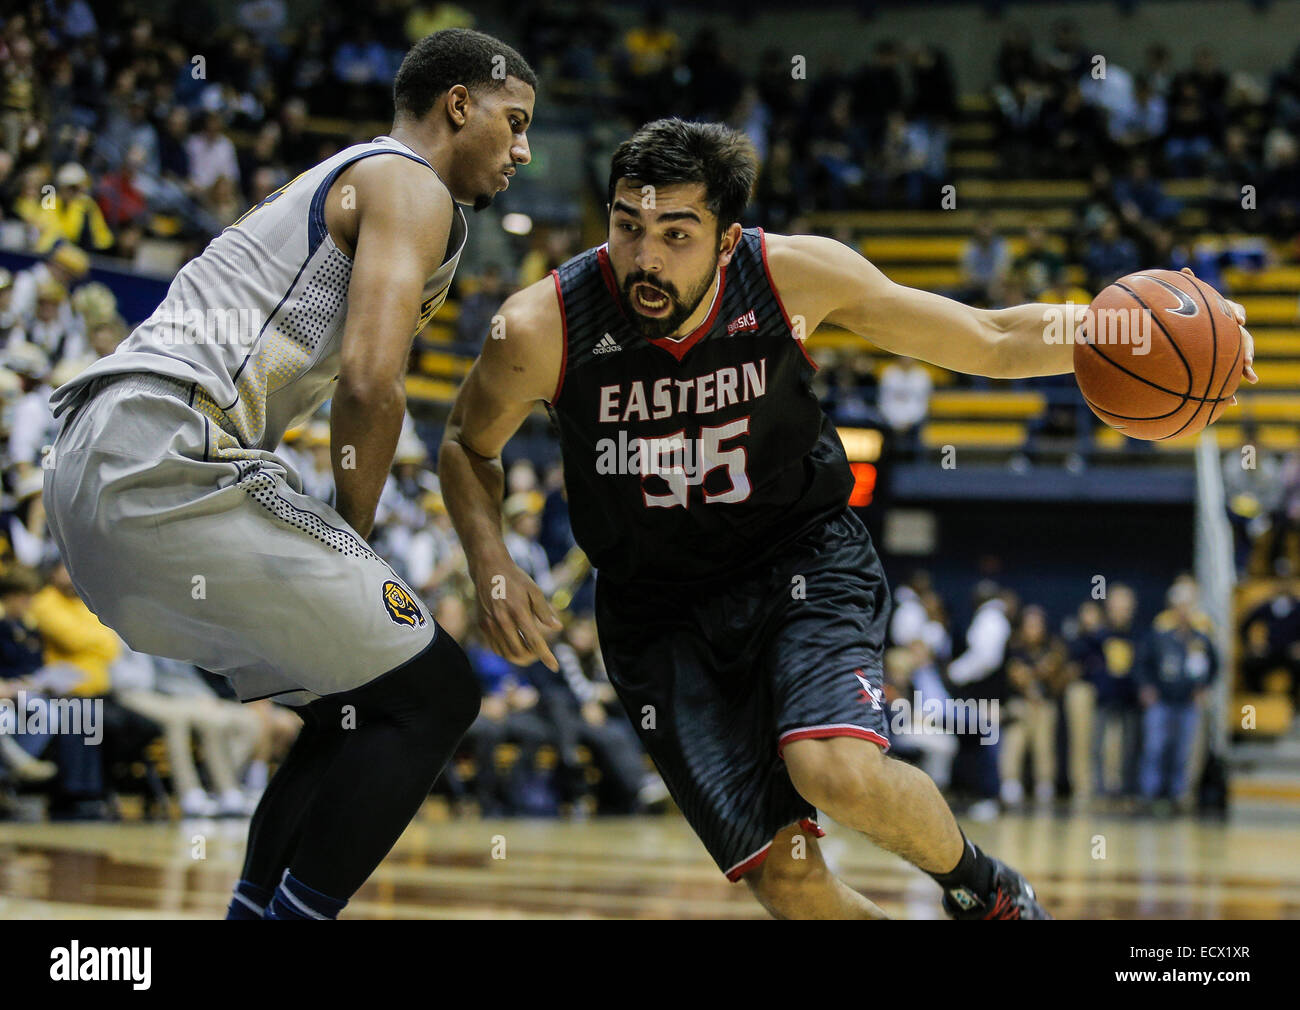 Berkeley, California, USA. 19th Dec, 2014. E. Washington F # 55 Venky Jois drive to the hoop pass Cal # 14 Christian Behrens during NCAA Men's Basketball game between Eastern Washington Eagles and California Golden Bears 67-78 lost at Hass Pavilion Berkeley Calif. Credit:  csm/Alamy Live News Stock Photo